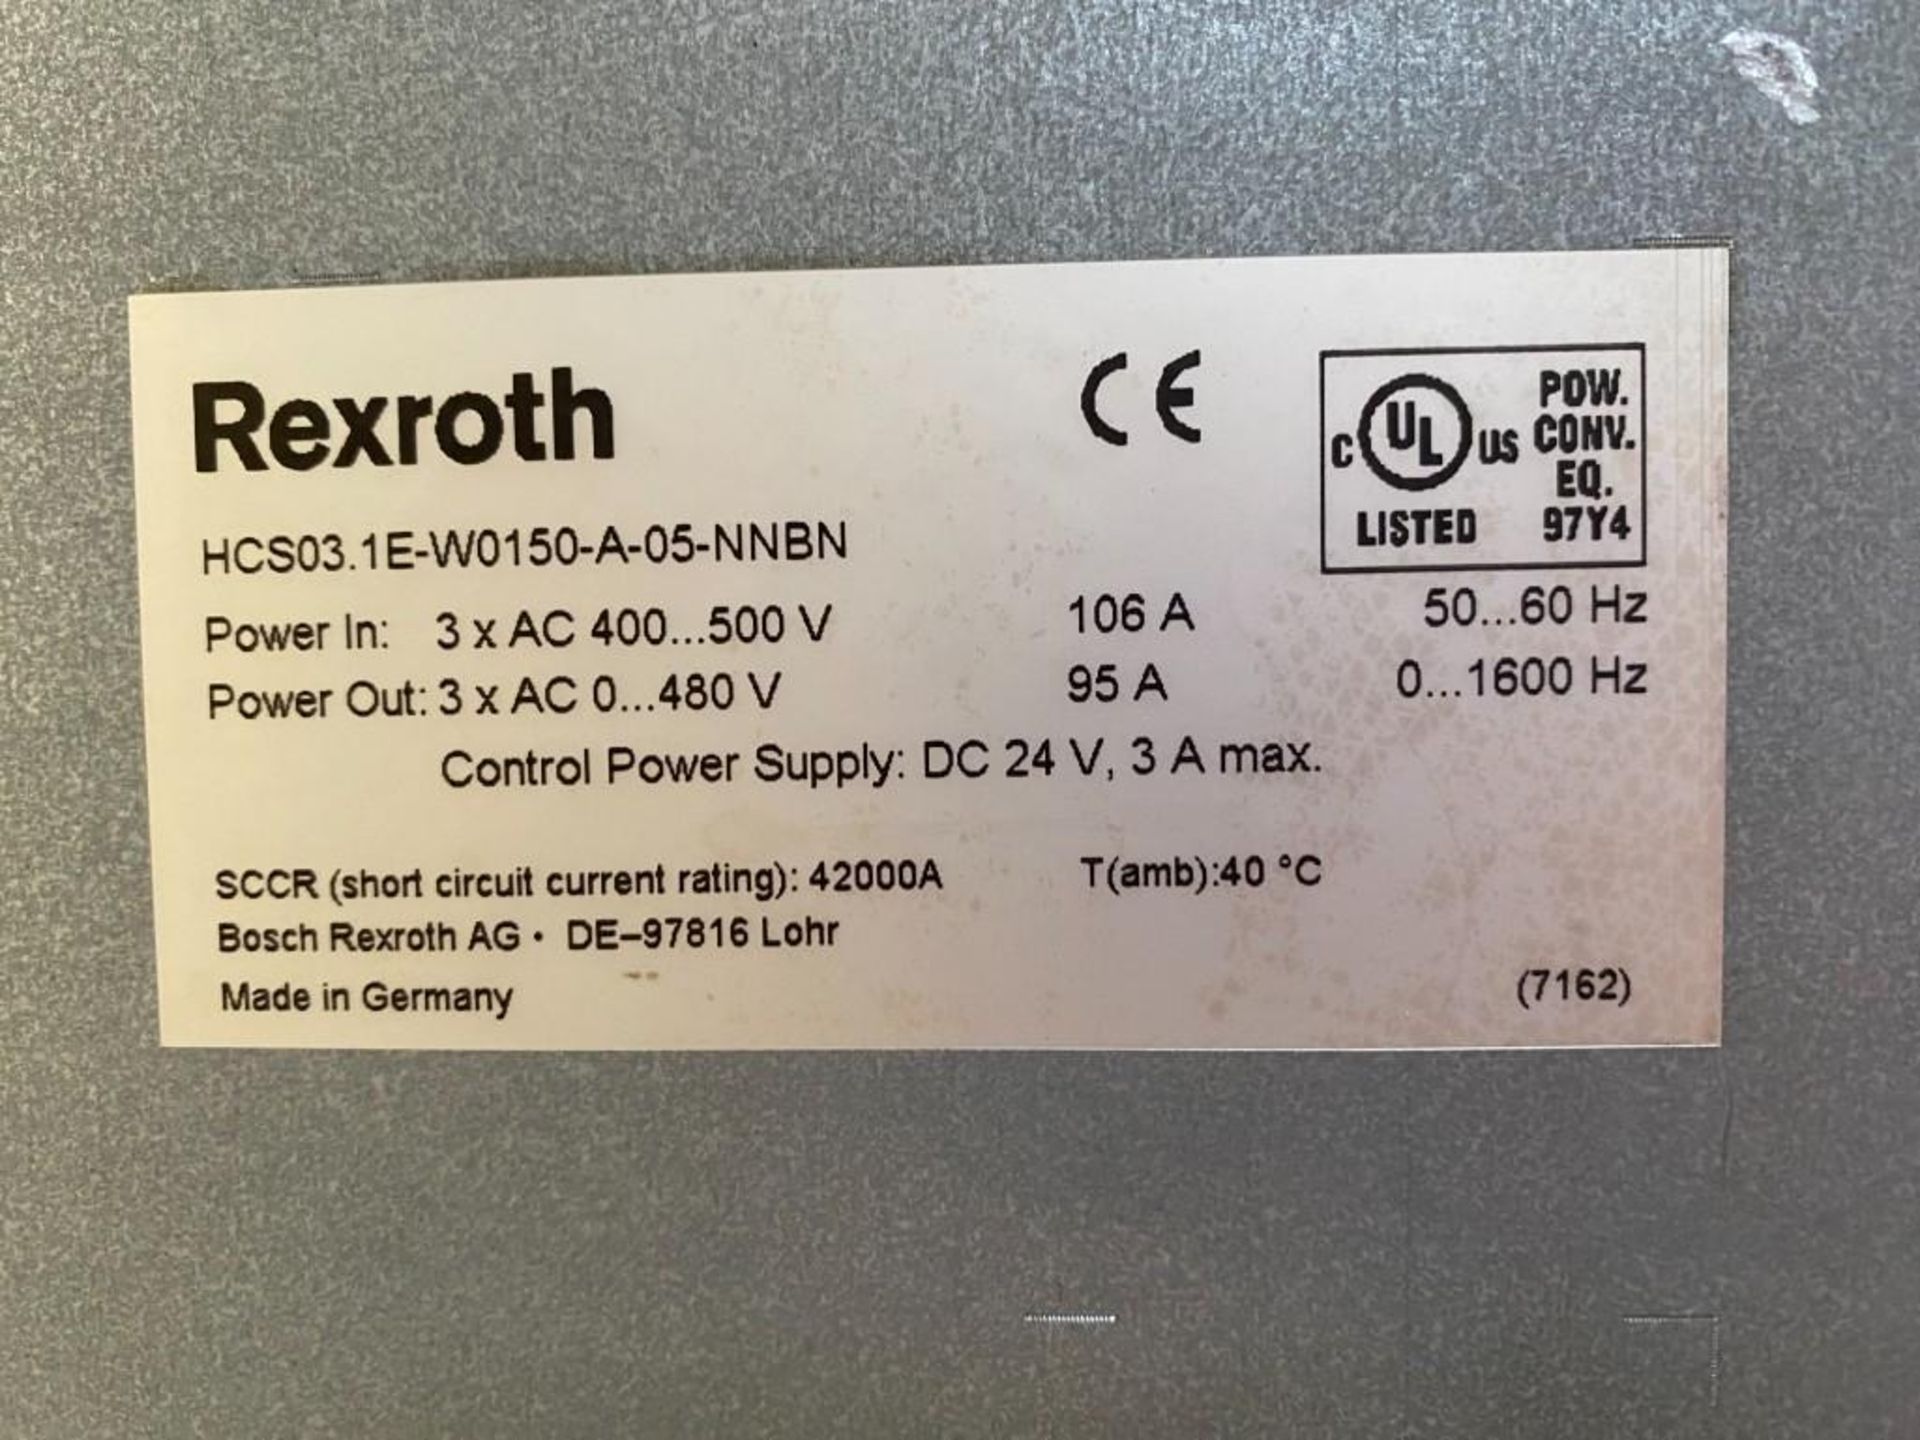 1 USED SPARE REXROTH DRIVE HCS03.1E-W0150-A-05-NNBN - Image 2 of 4